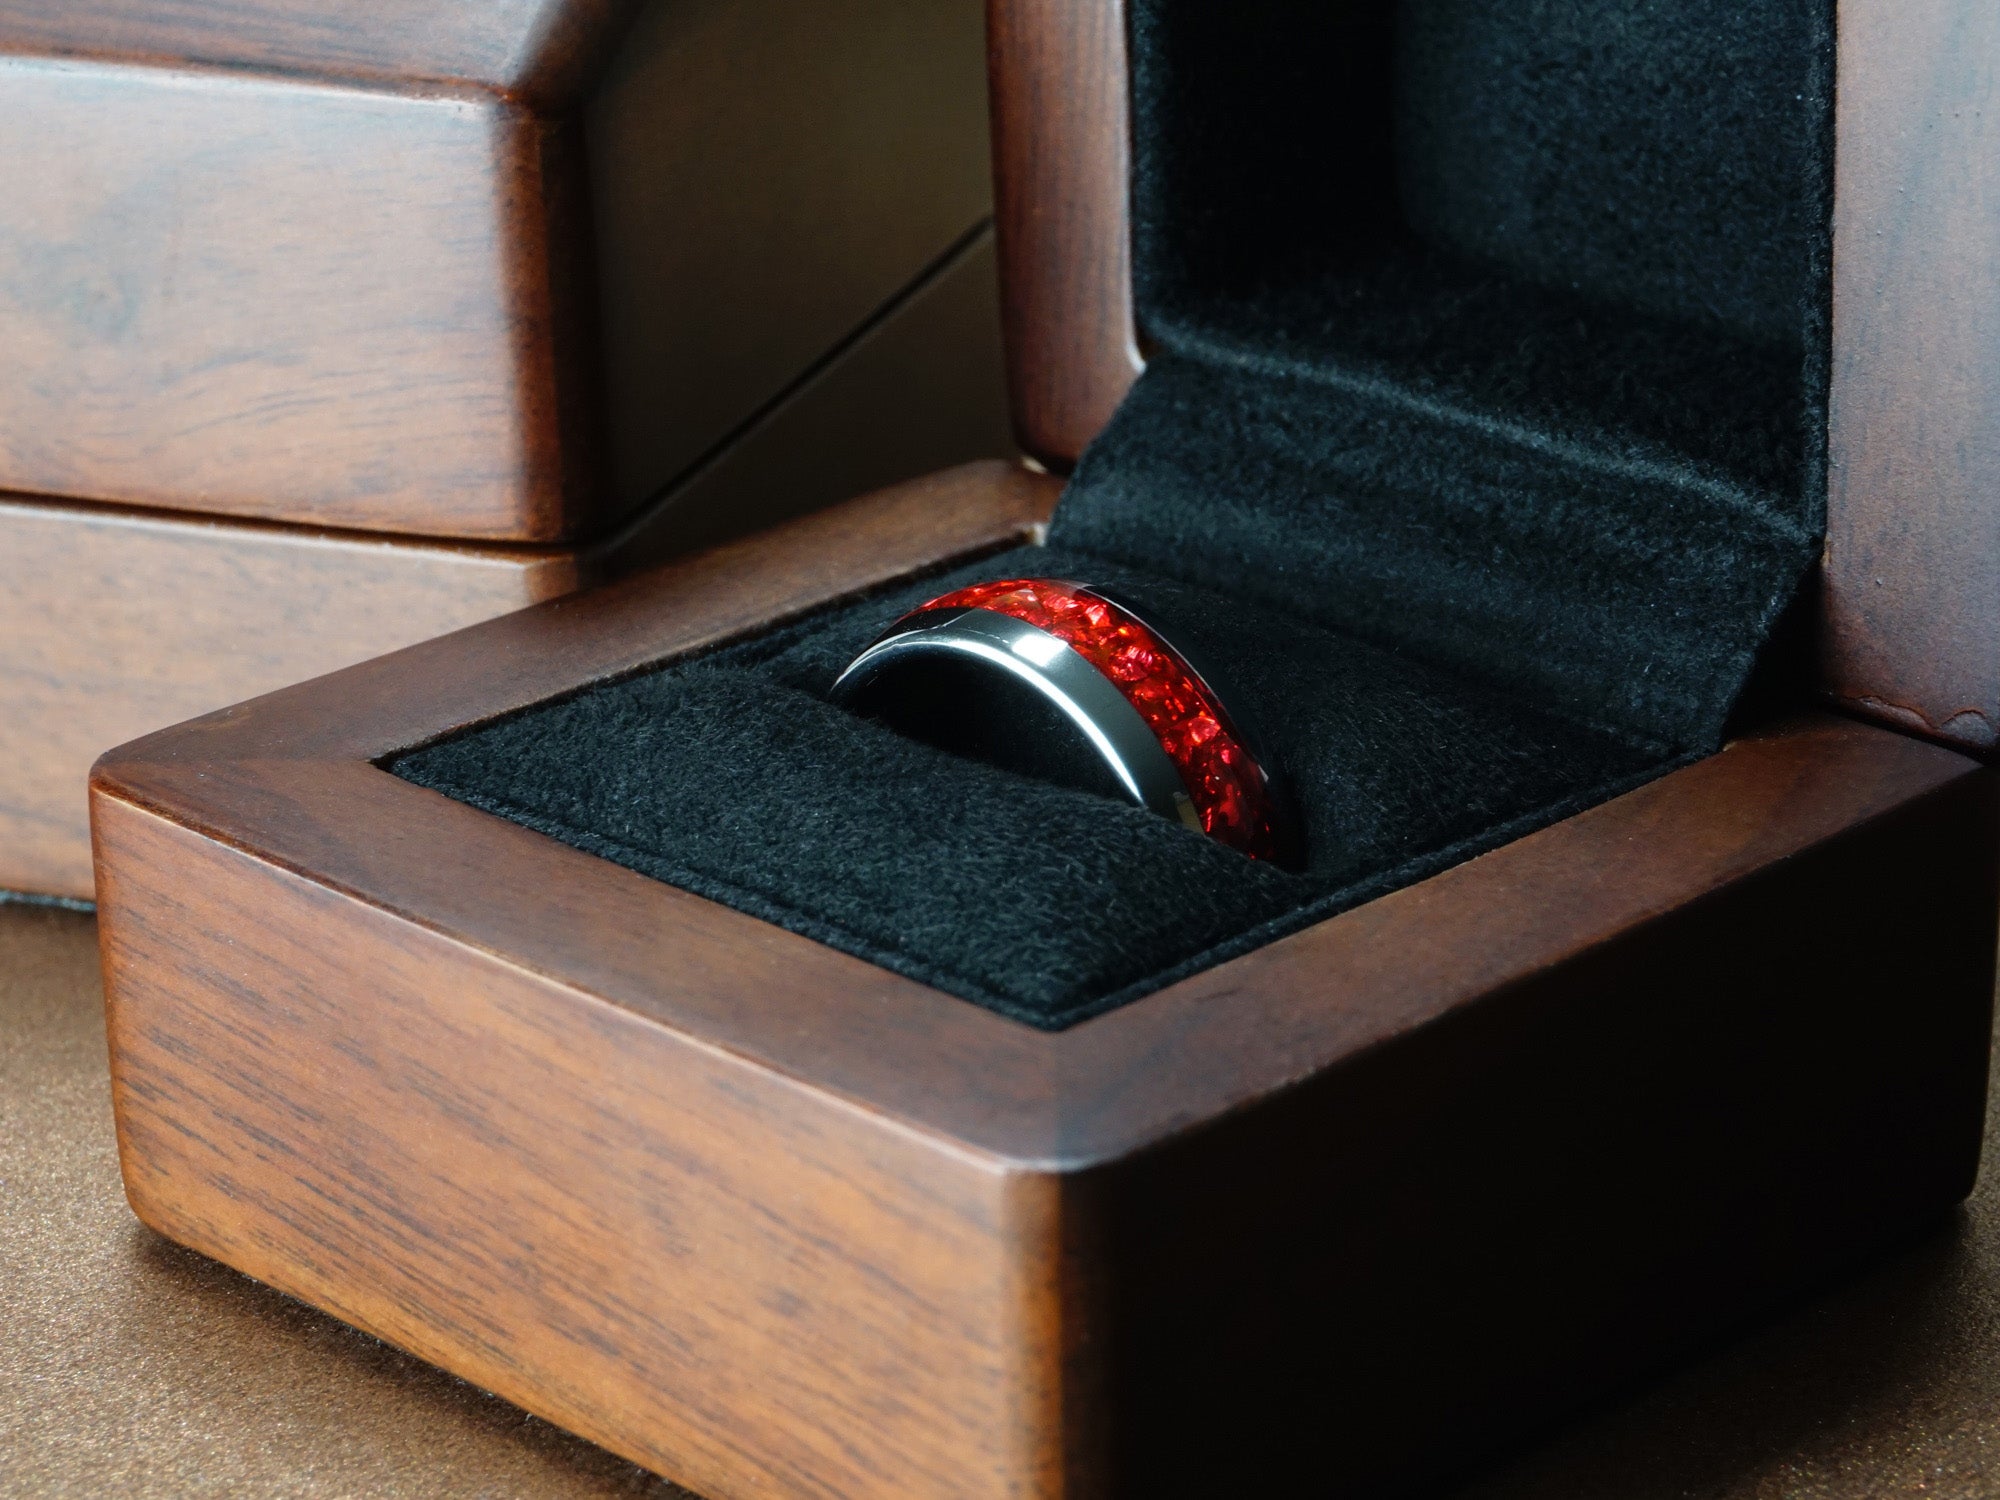 red garnet tungsten ring, silver polished 8mm ring with ruby red lab garnet inlay, mens wedding band, luxury wood ring box